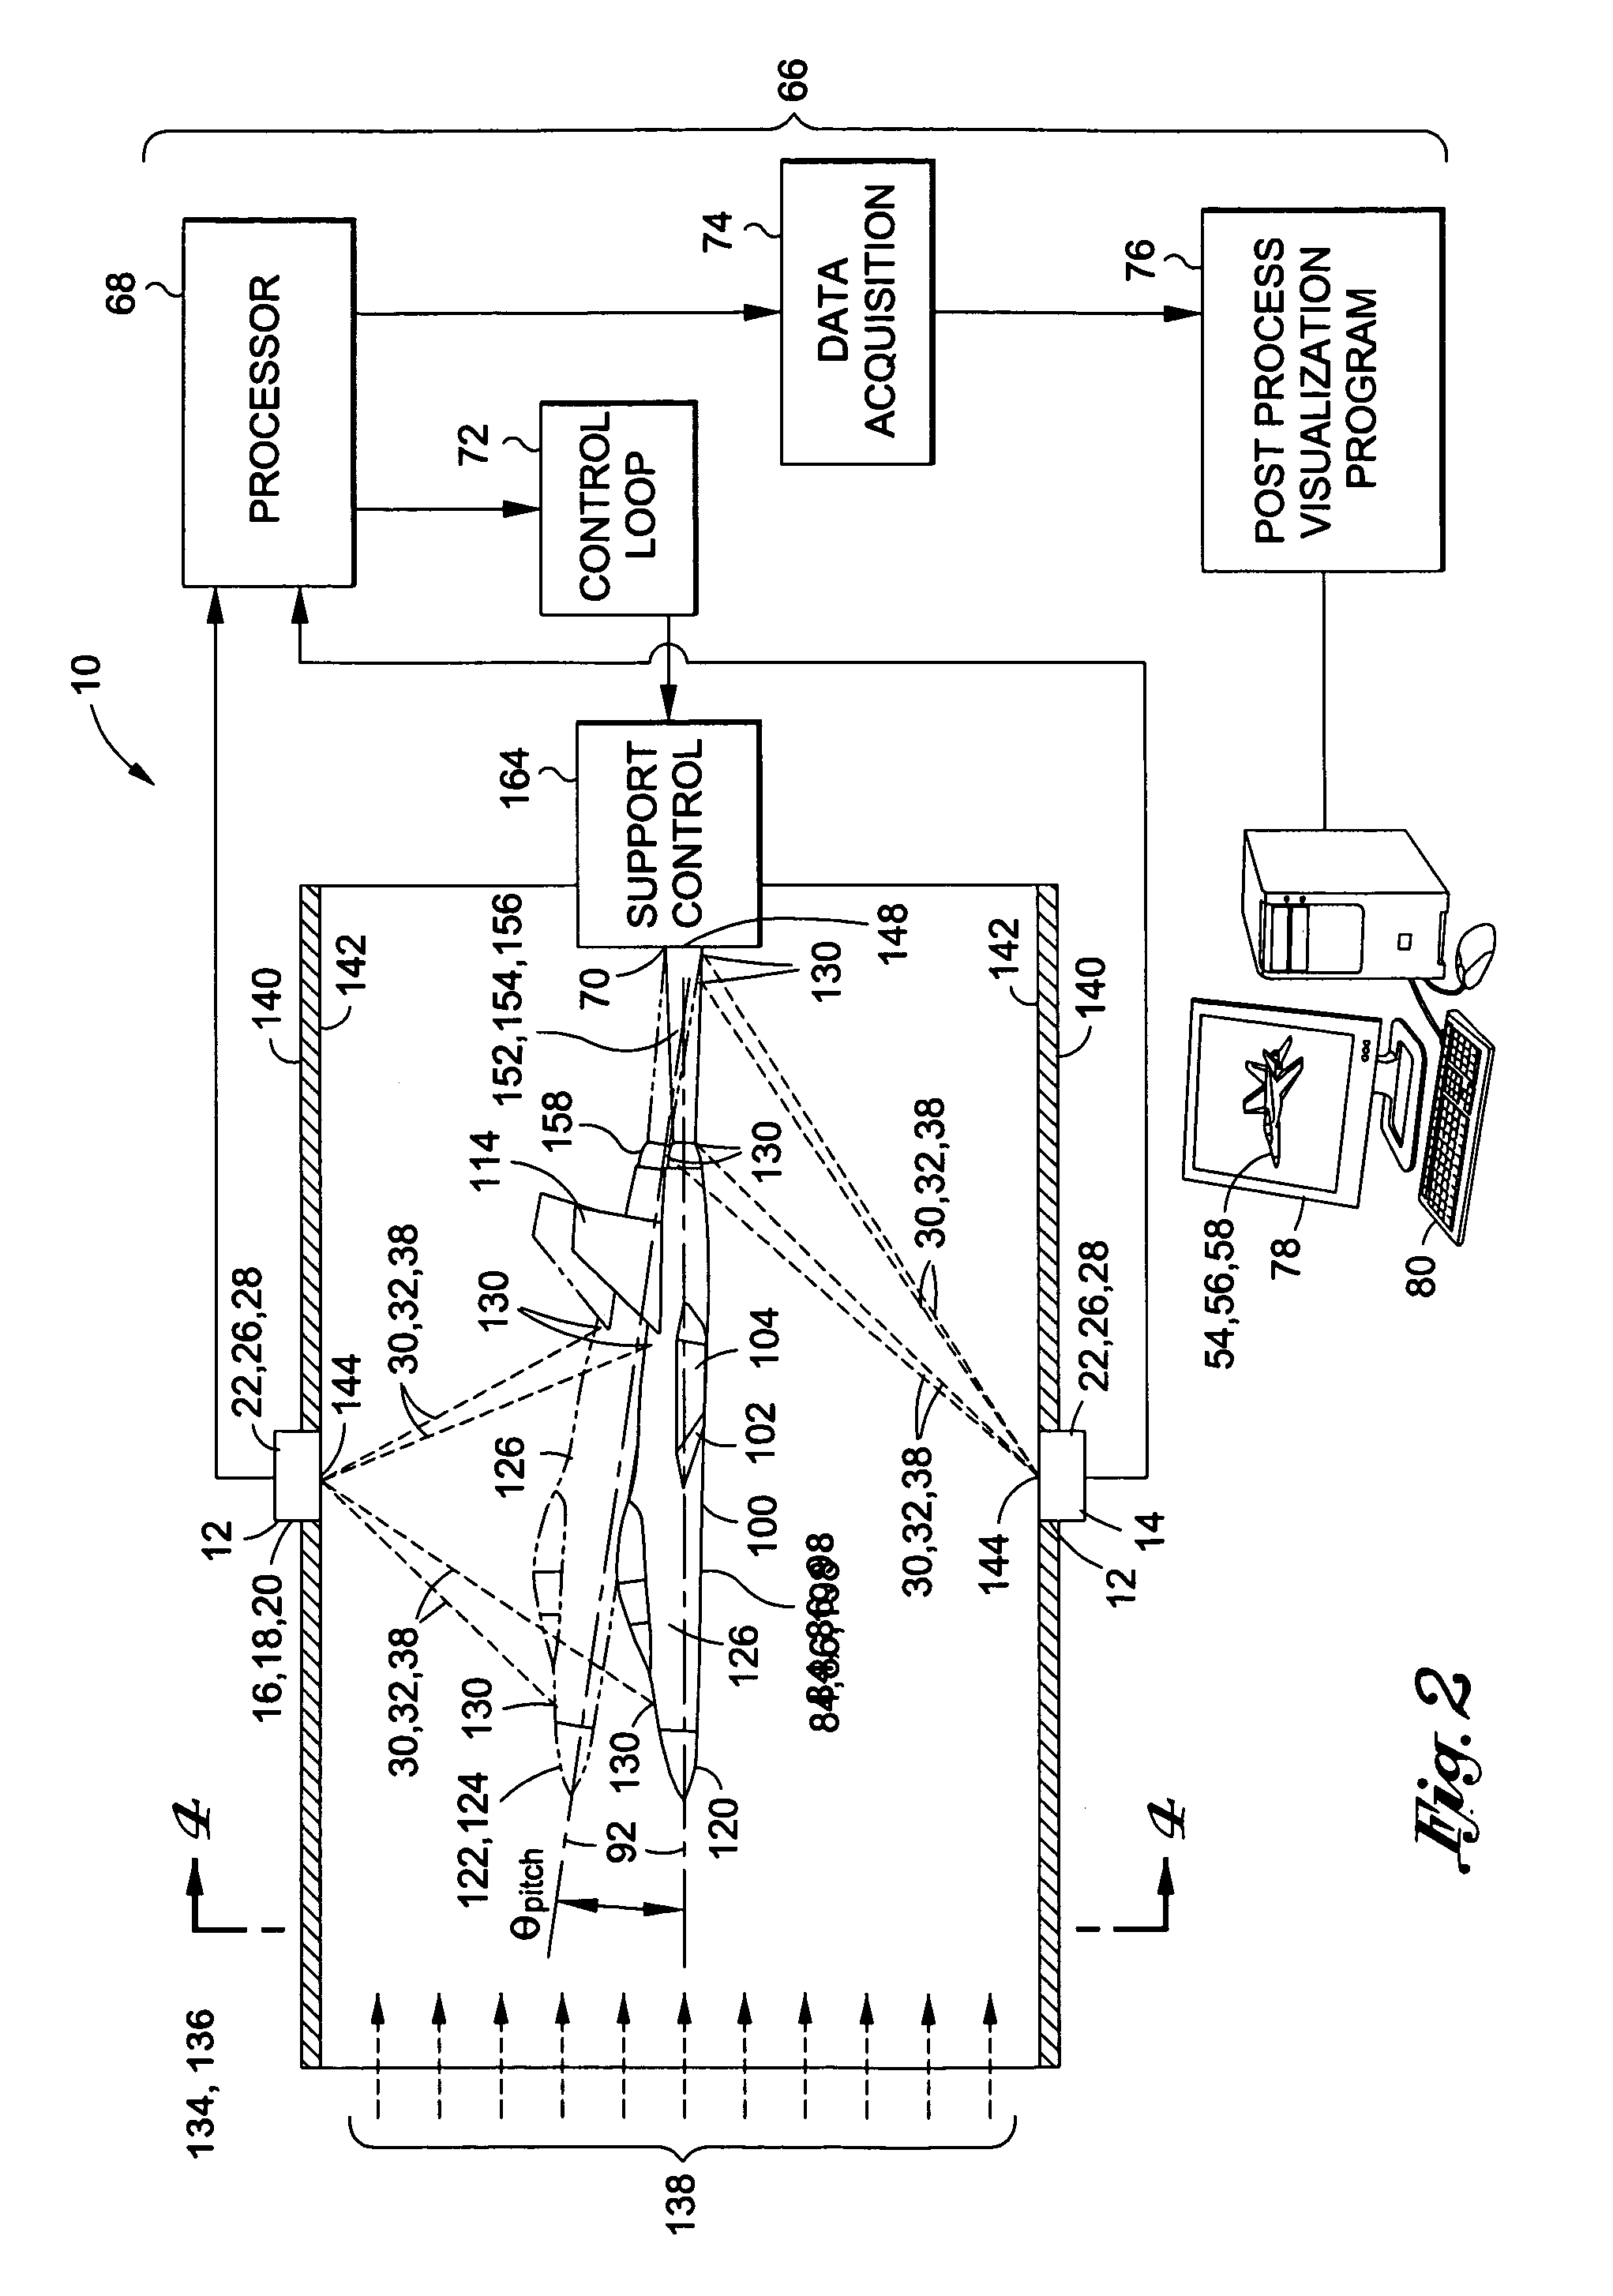 System and method for measuring deformation of an object in a fluid tunnel